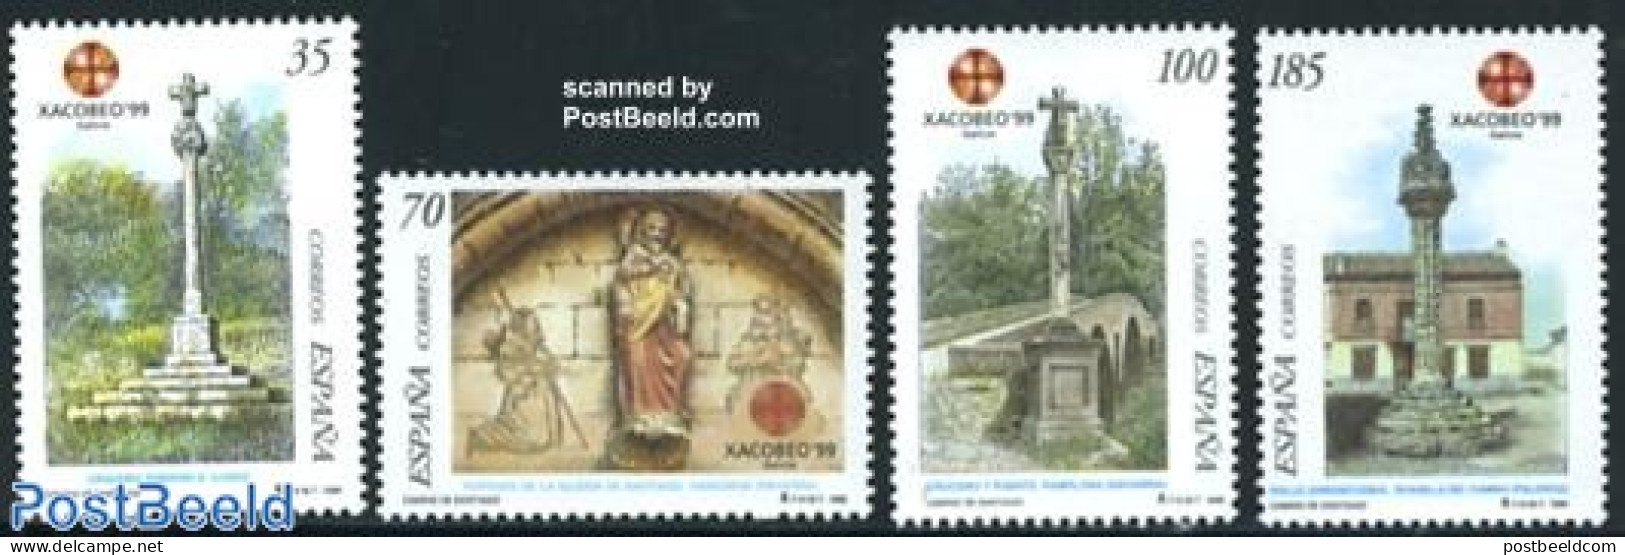 Spain 1999 Holy Year Of Compostela 4v, Mint NH, Religion - Religion - Nuevos